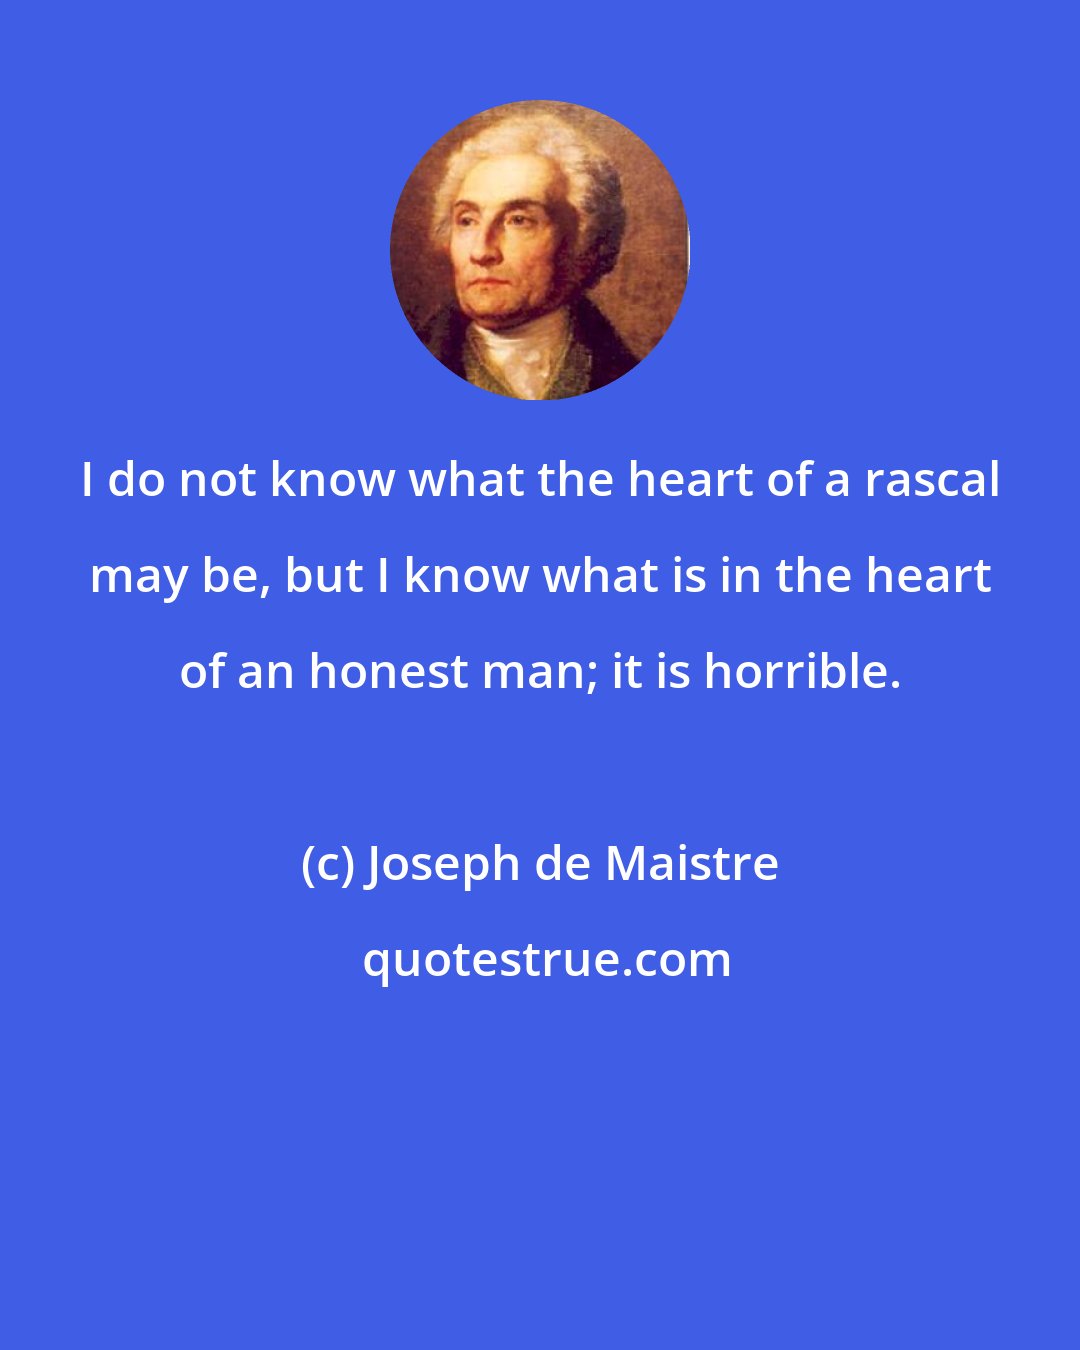 Joseph de Maistre: I do not know what the heart of a rascal may be, but I know what is in the heart of an honest man; it is horrible.